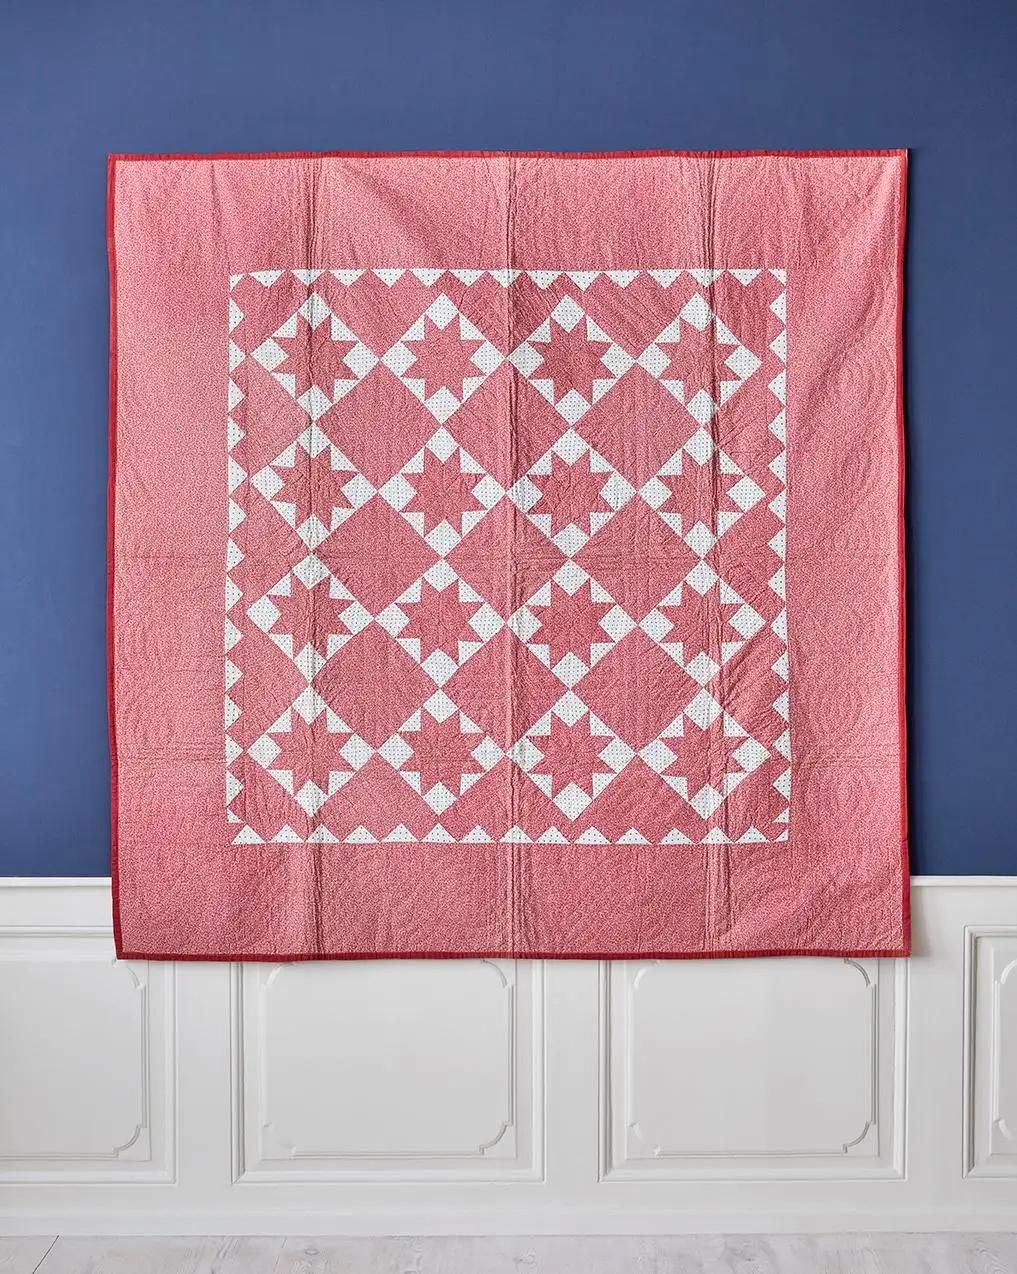 USA, 1880s

Antique patchwork quilt. ‘Le Moyne Stars’ - in dark pink and white. 

Measures: H 180 x W 180 cm.